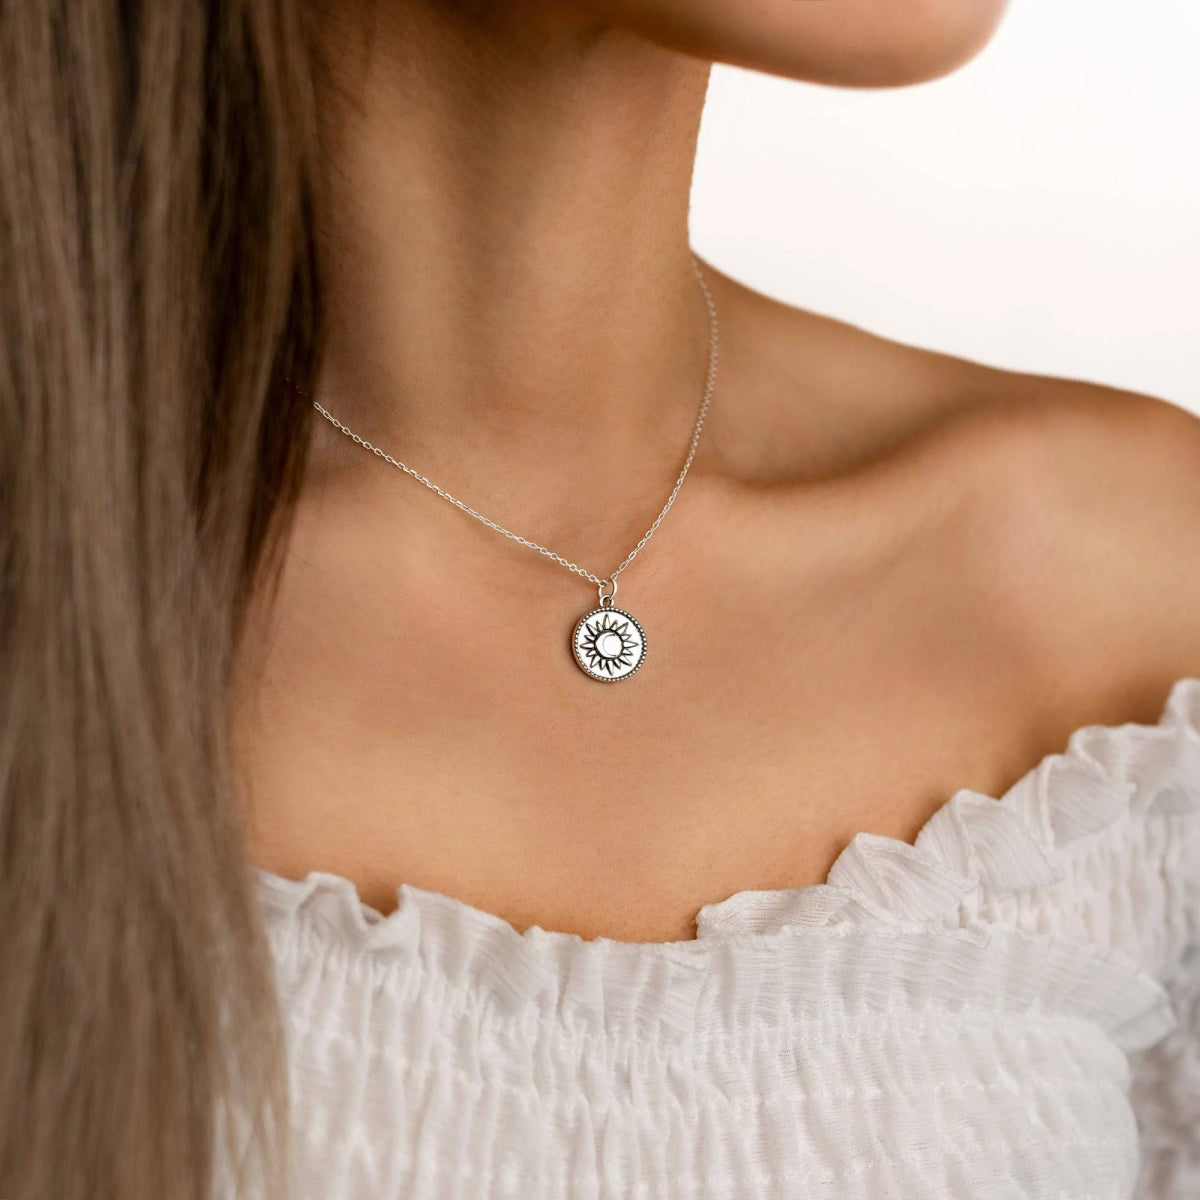 "Moon and Sun" Necklace - Milas Jewels Shop